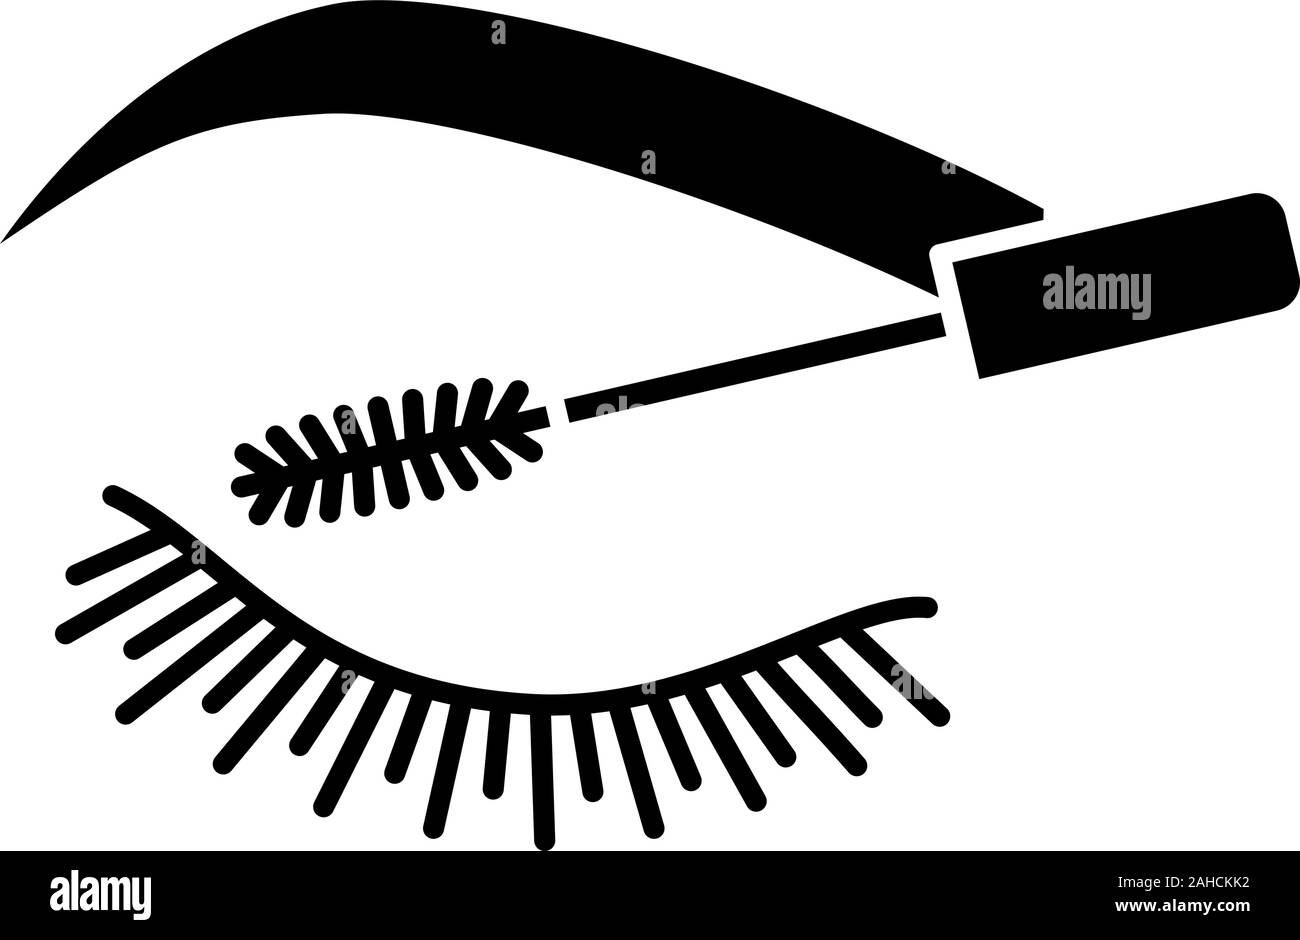 Eyelash mascara glyph icon. Silhouette symbol. Lashes and eyebrows tinting. Lashes and brows makeup product. Negative space. Vector isolated illustrat Stock Vector